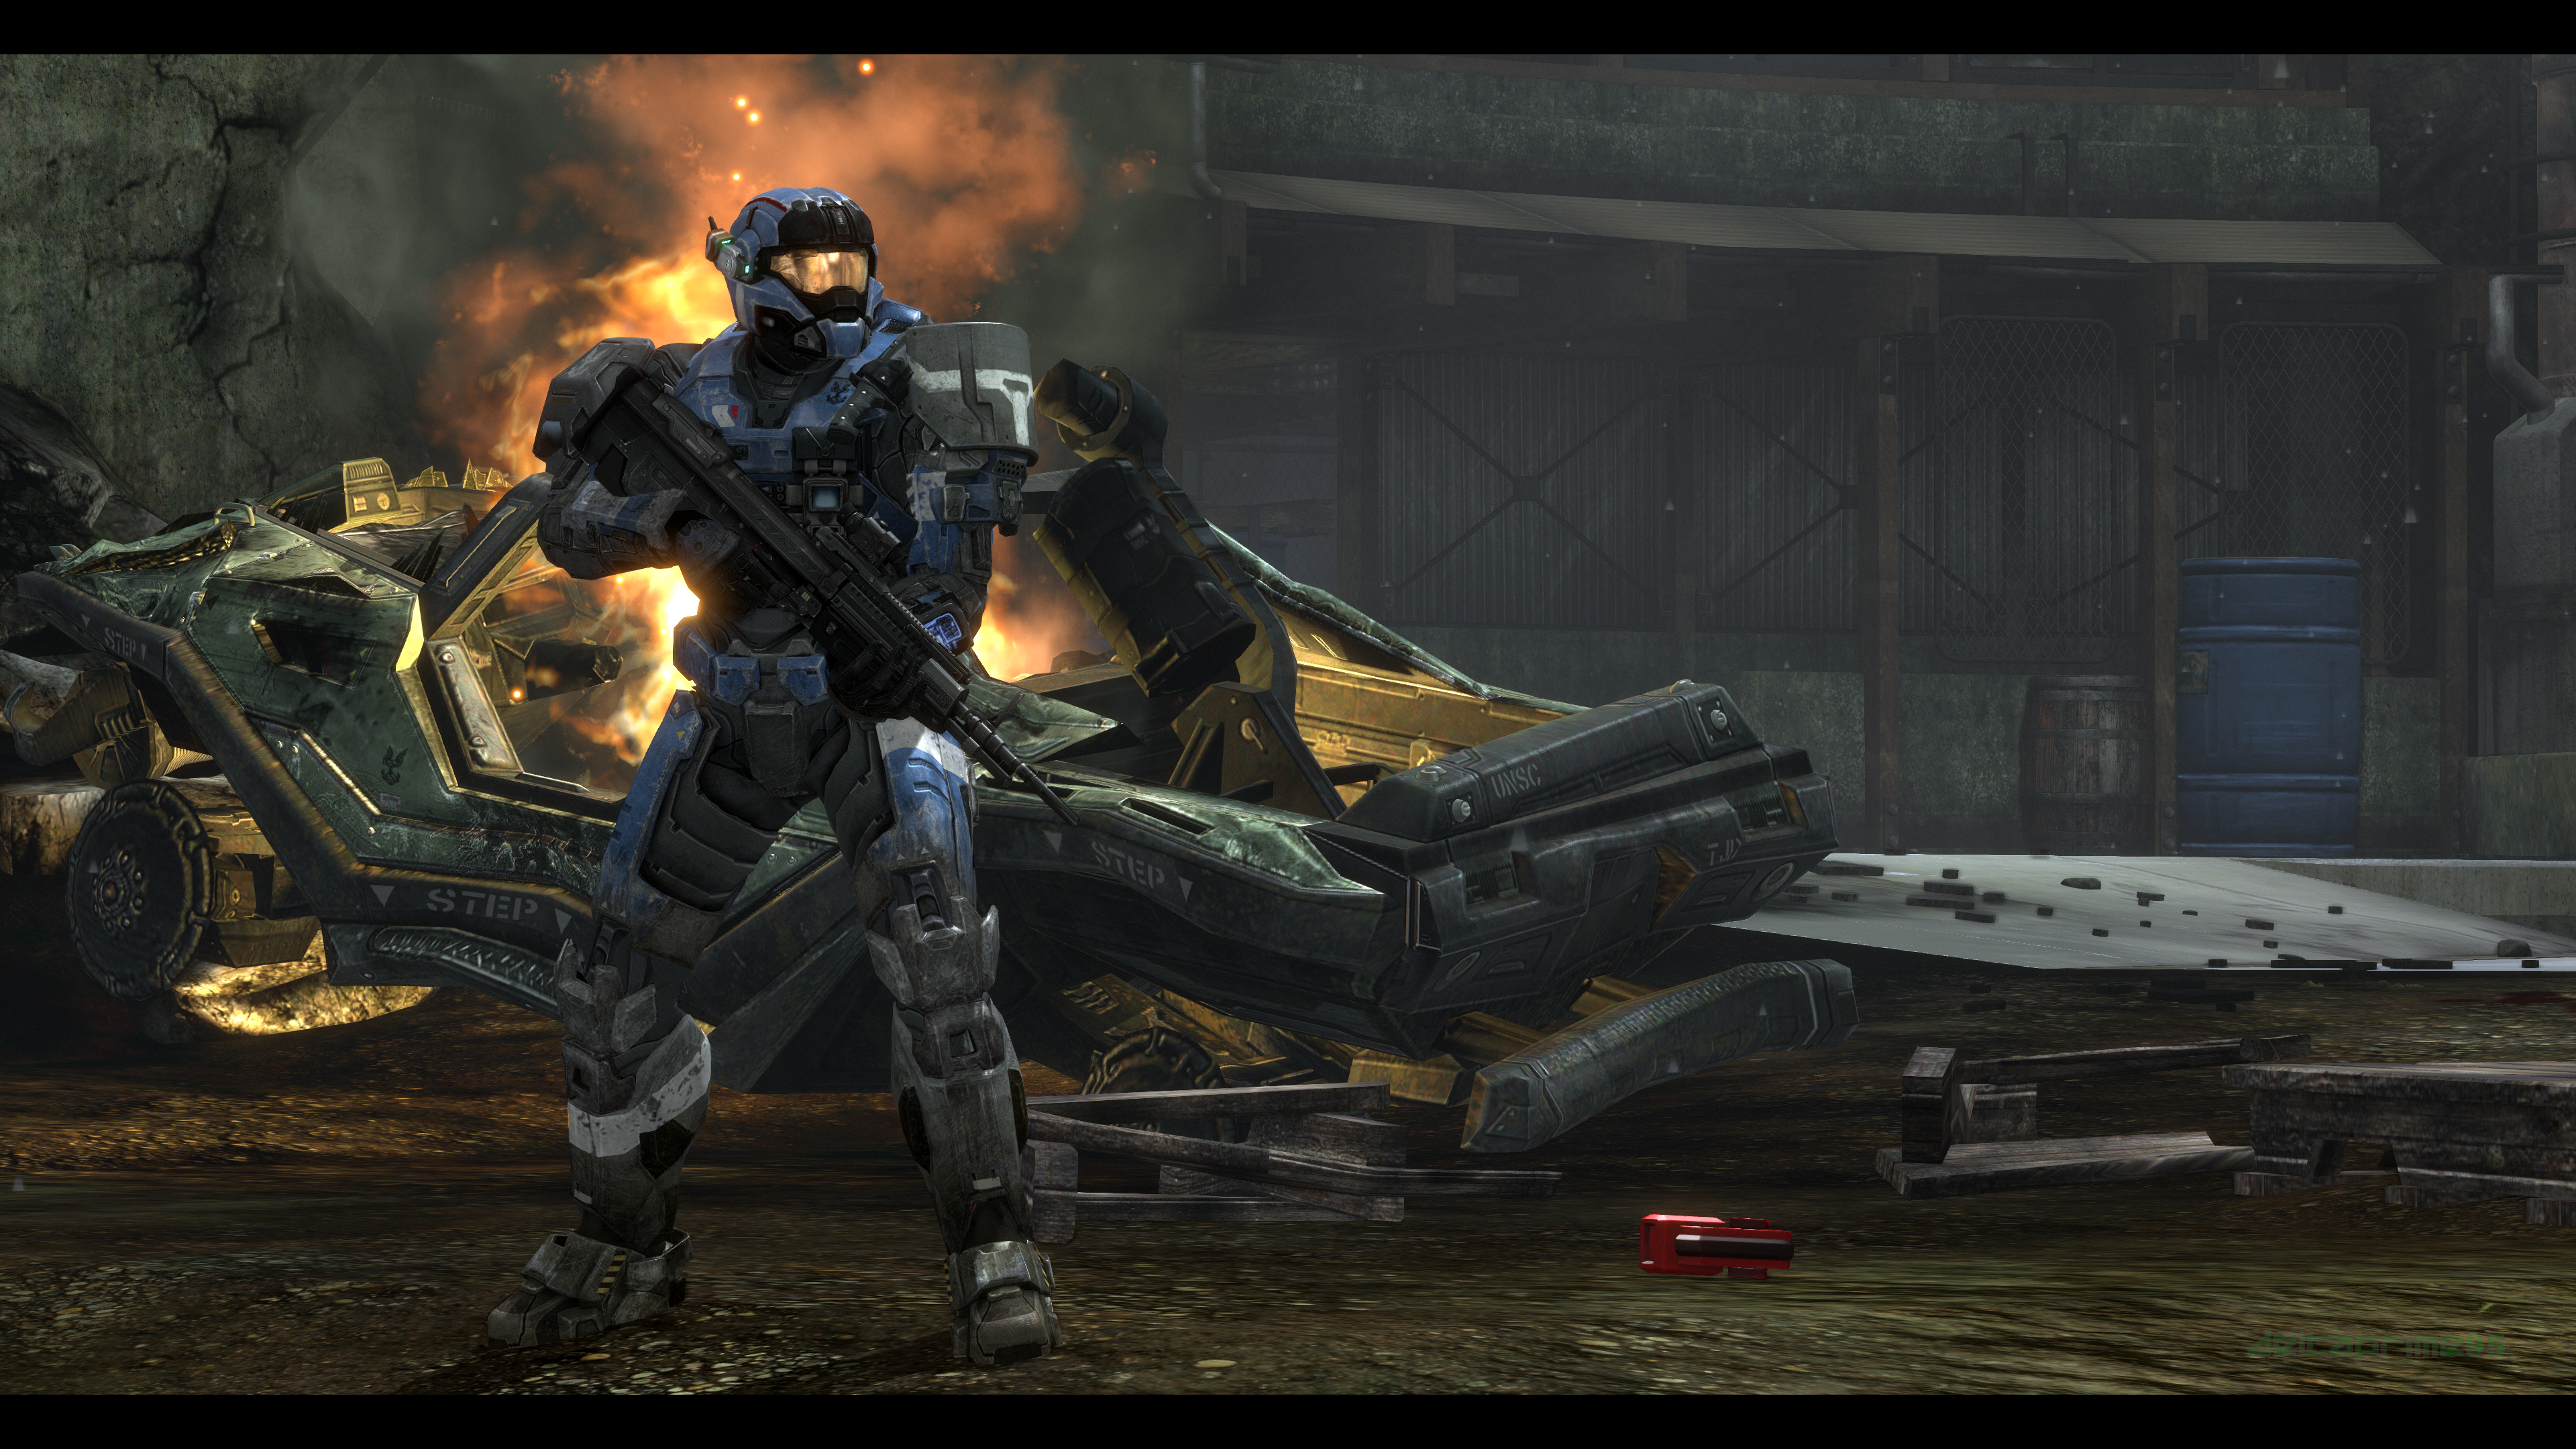 PC Gaming Screen Shot In Game Halo Reach Planet Reach Carter A259 M12 Warthog Fire Spartans Halo 3840x2160